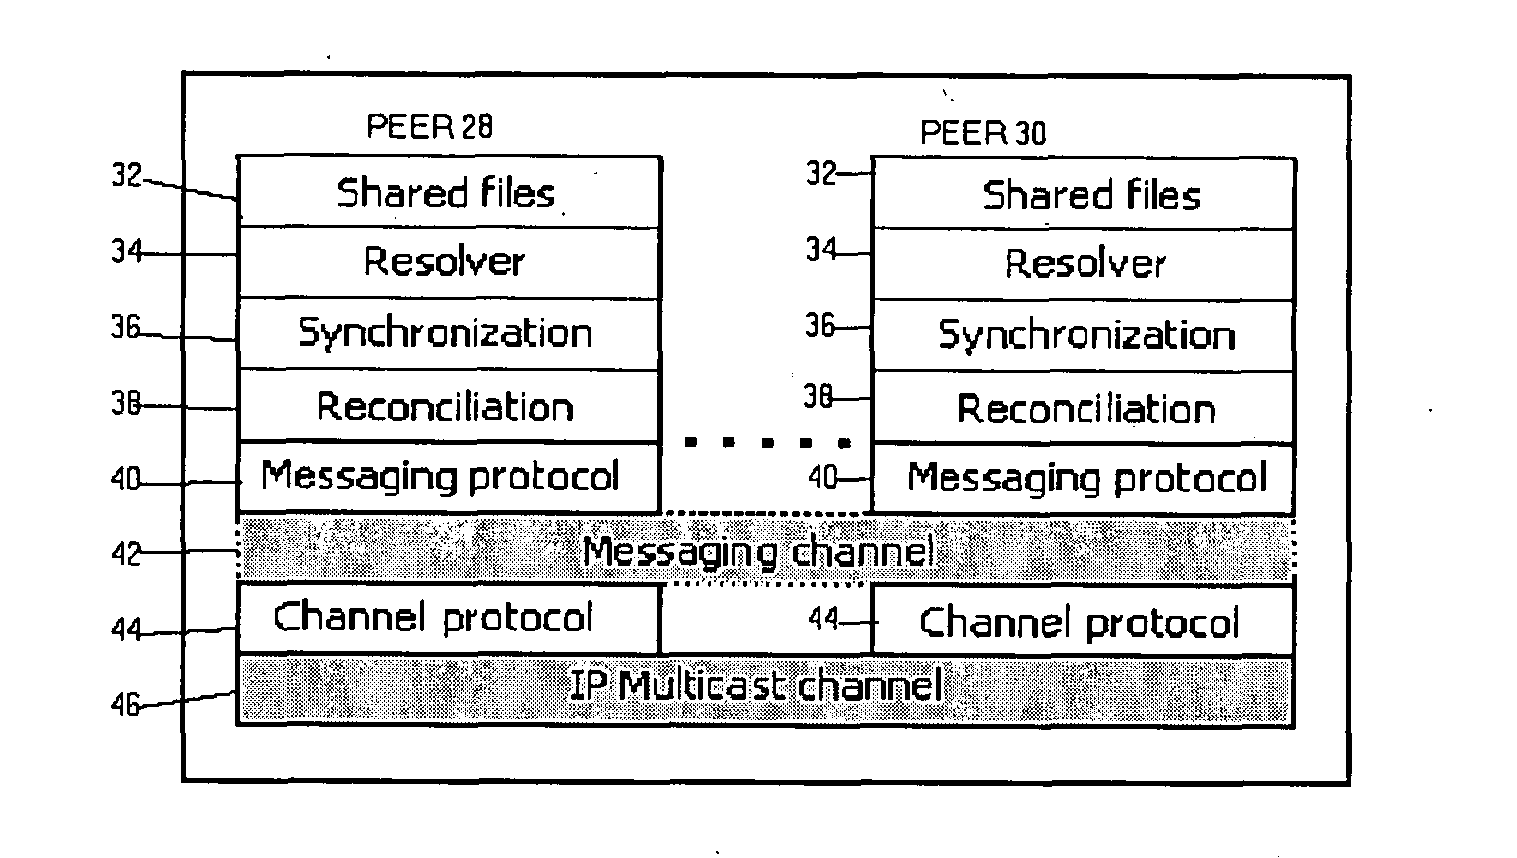 Distributed file system